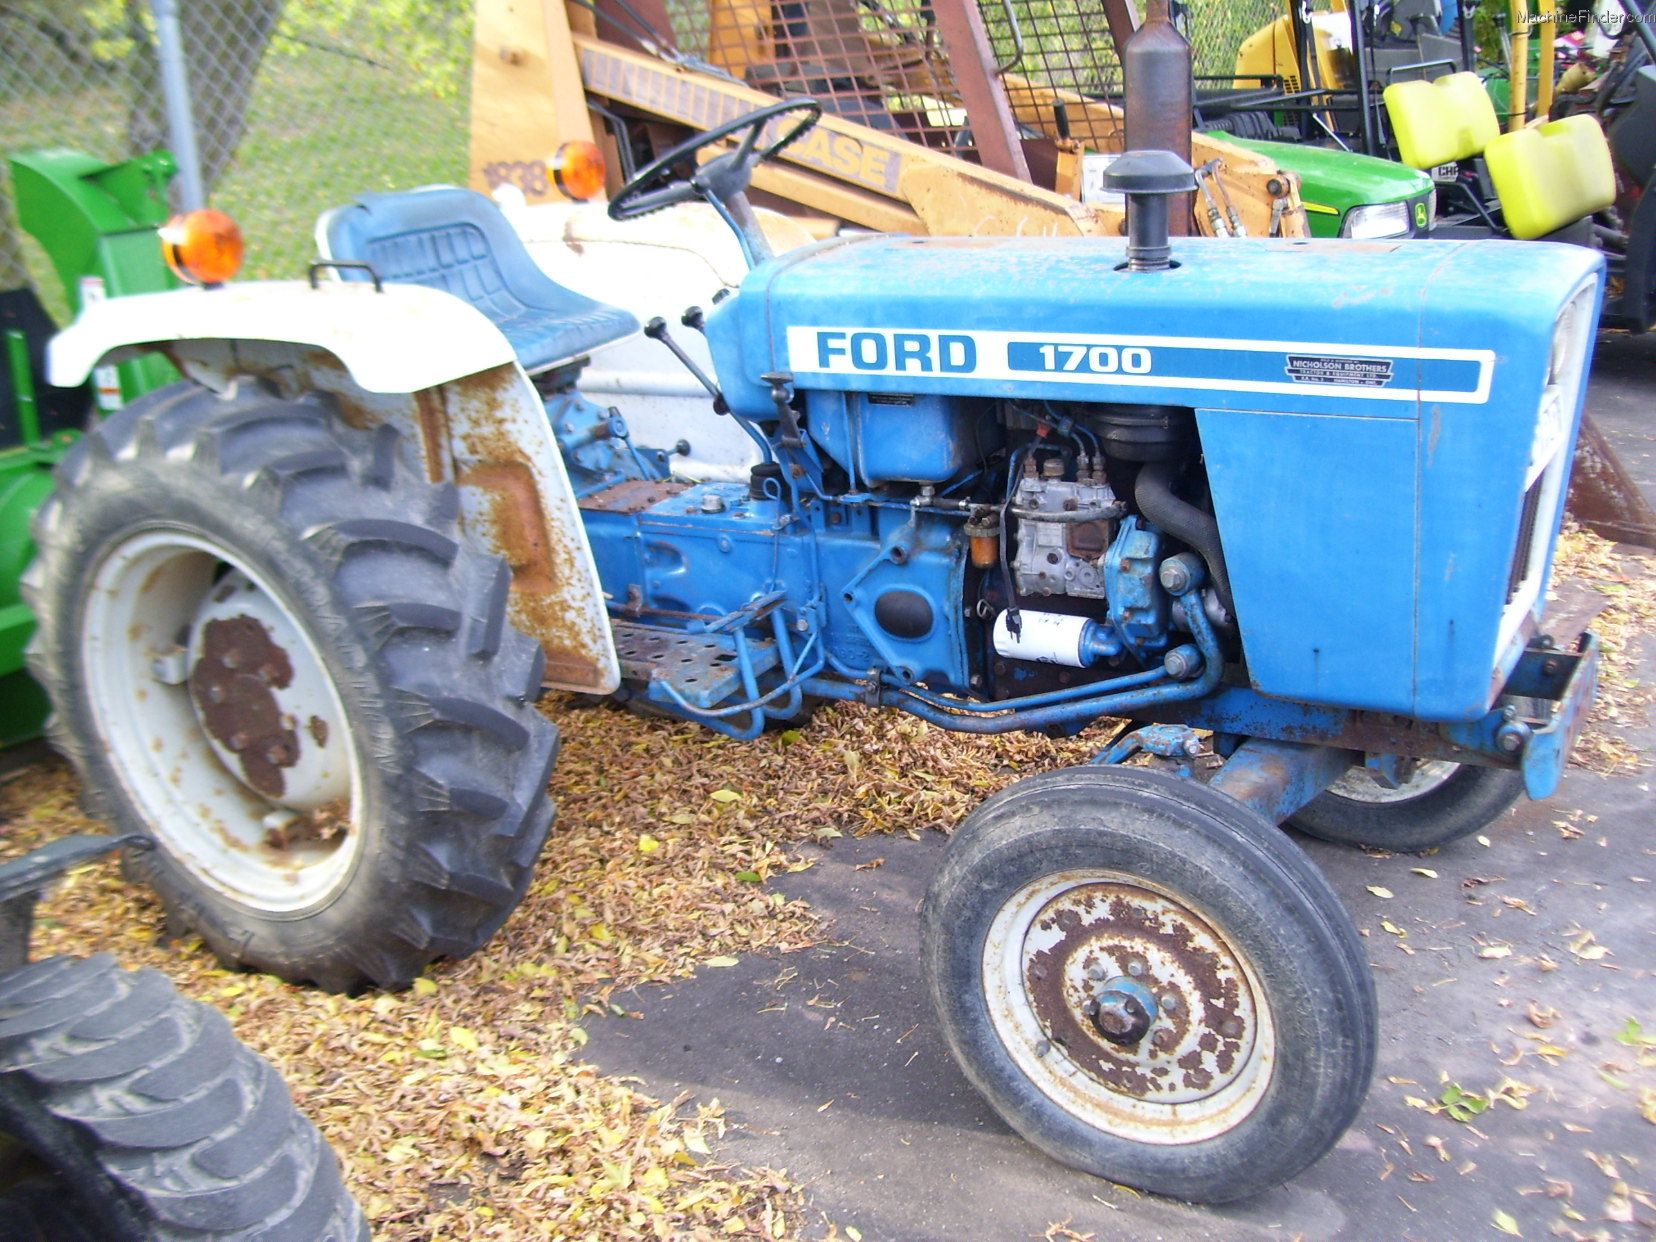 1700 Ford tractor #7